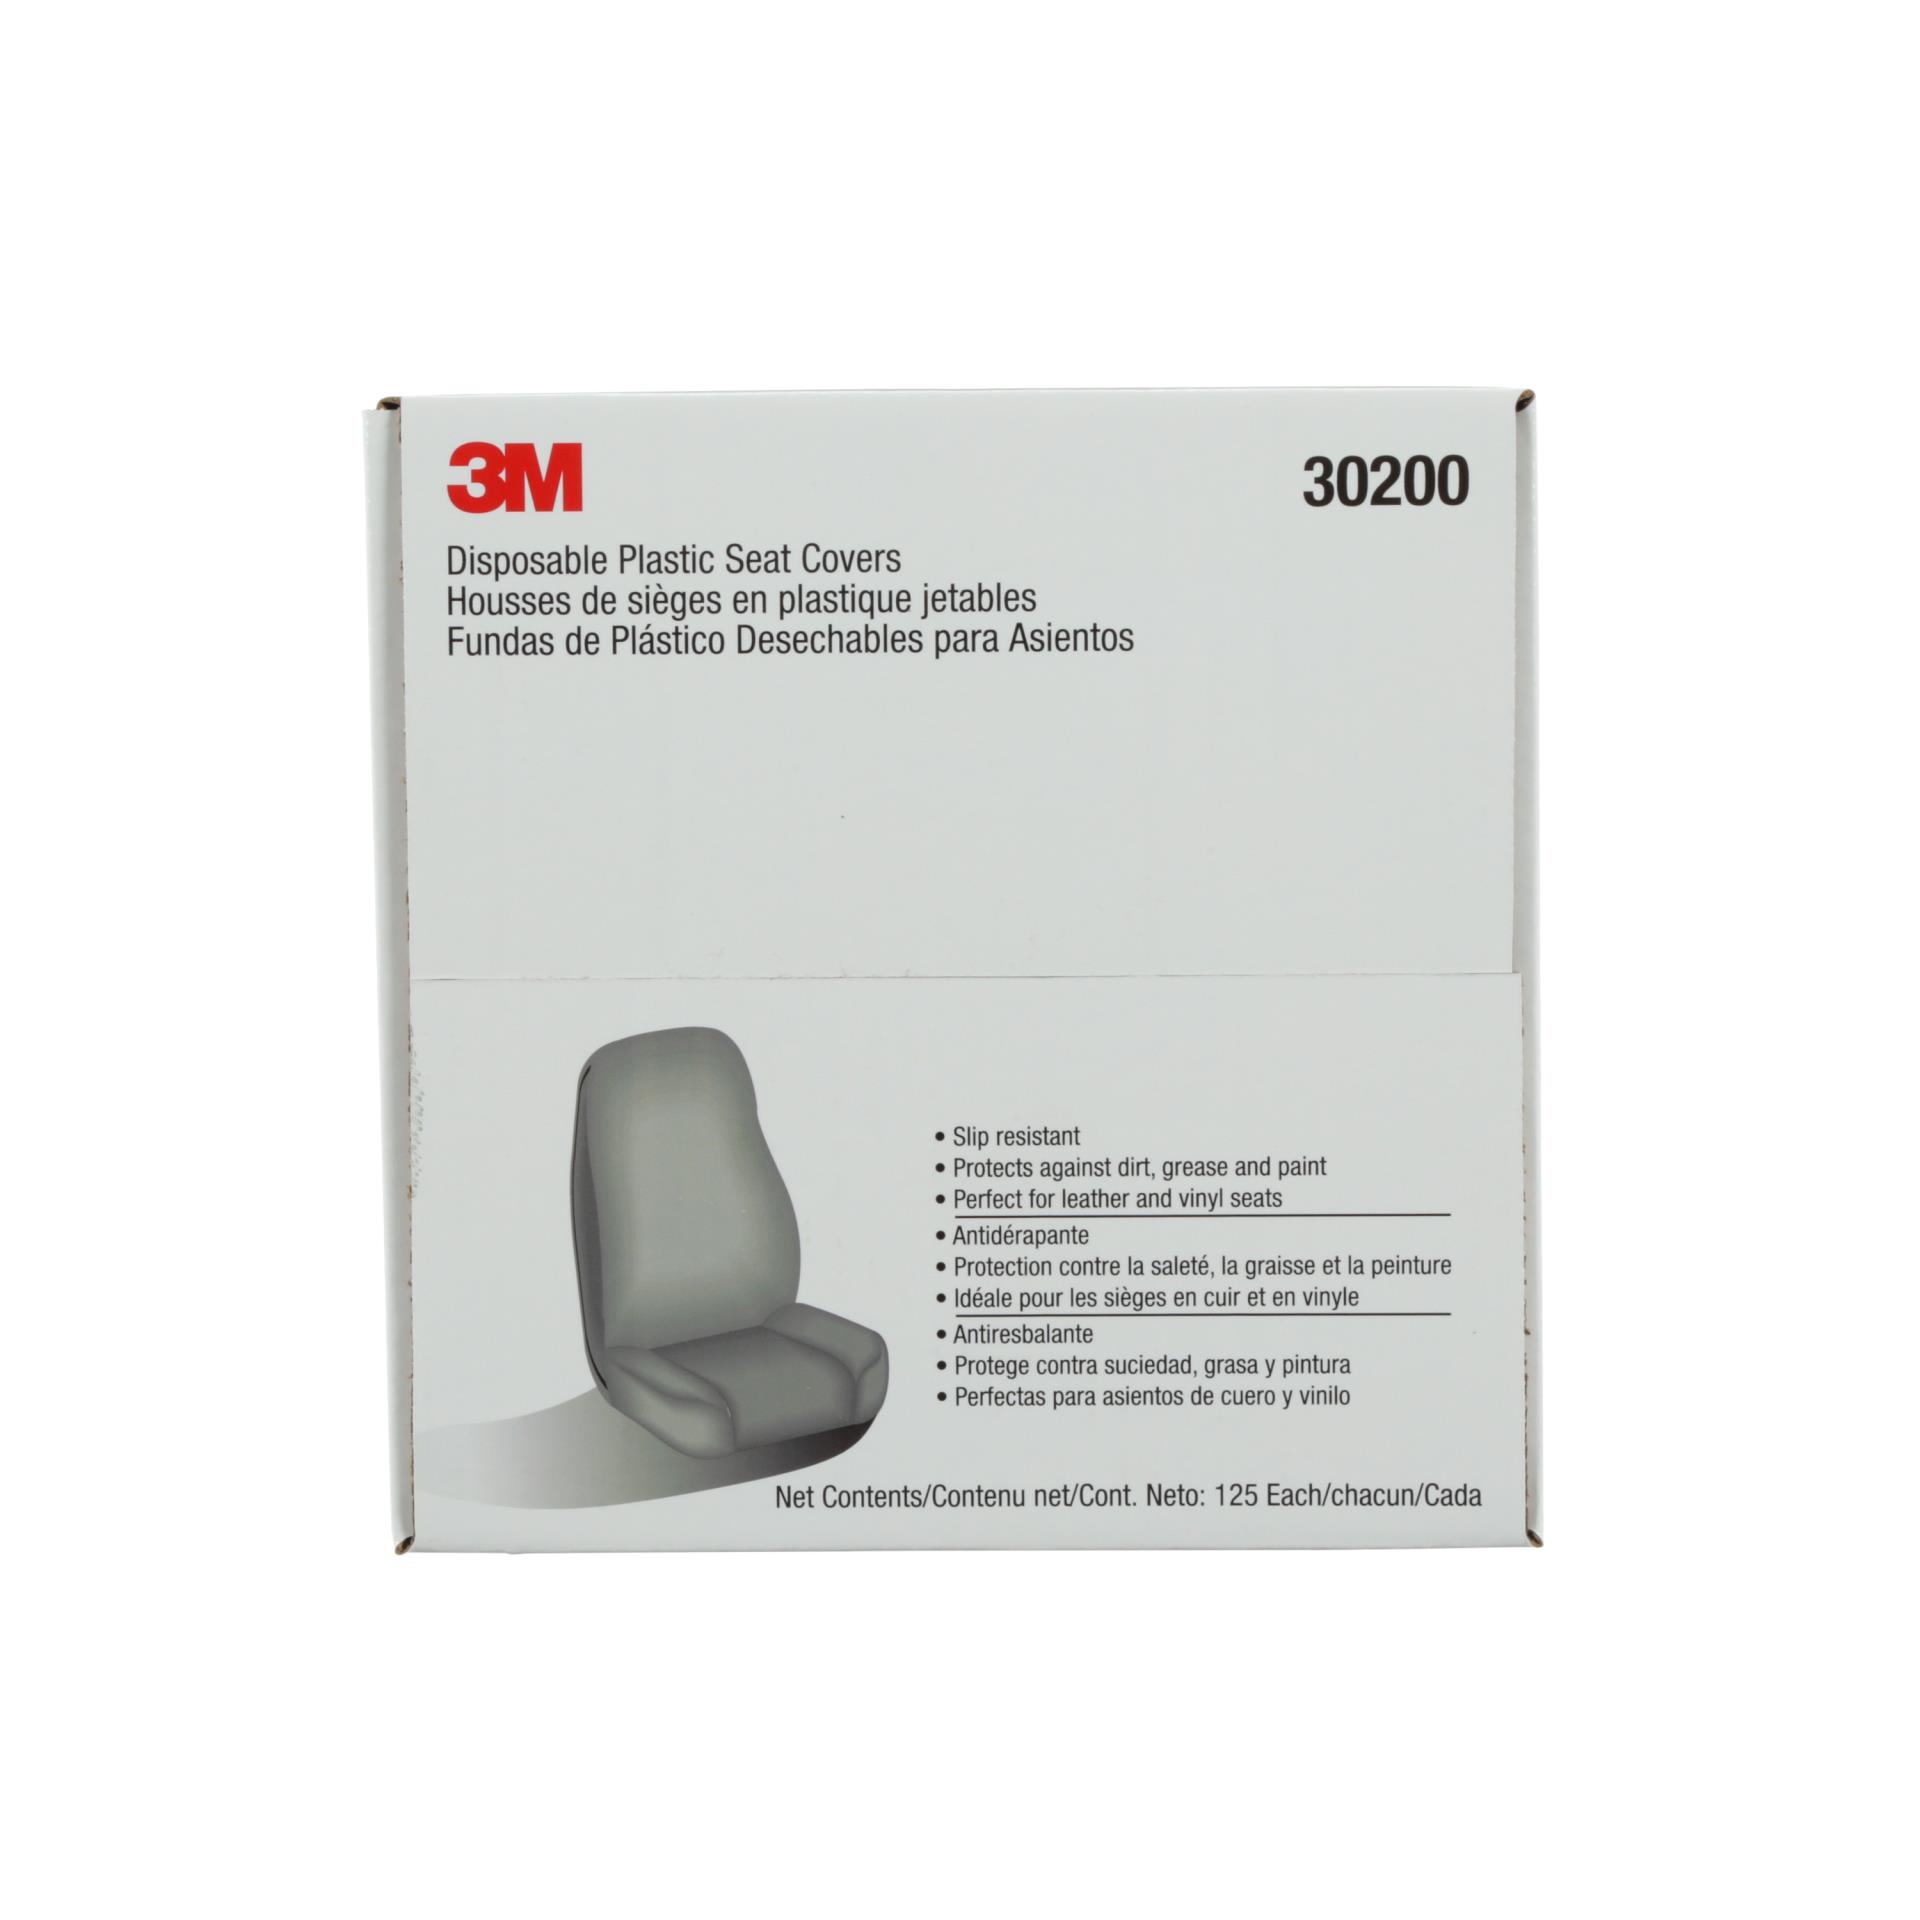 00051593302002 Marson Kwikee Disposable Plastic Seat covers, 30200, 125  per pack, pack per case Aircraft products protective-bags--covers  9347706